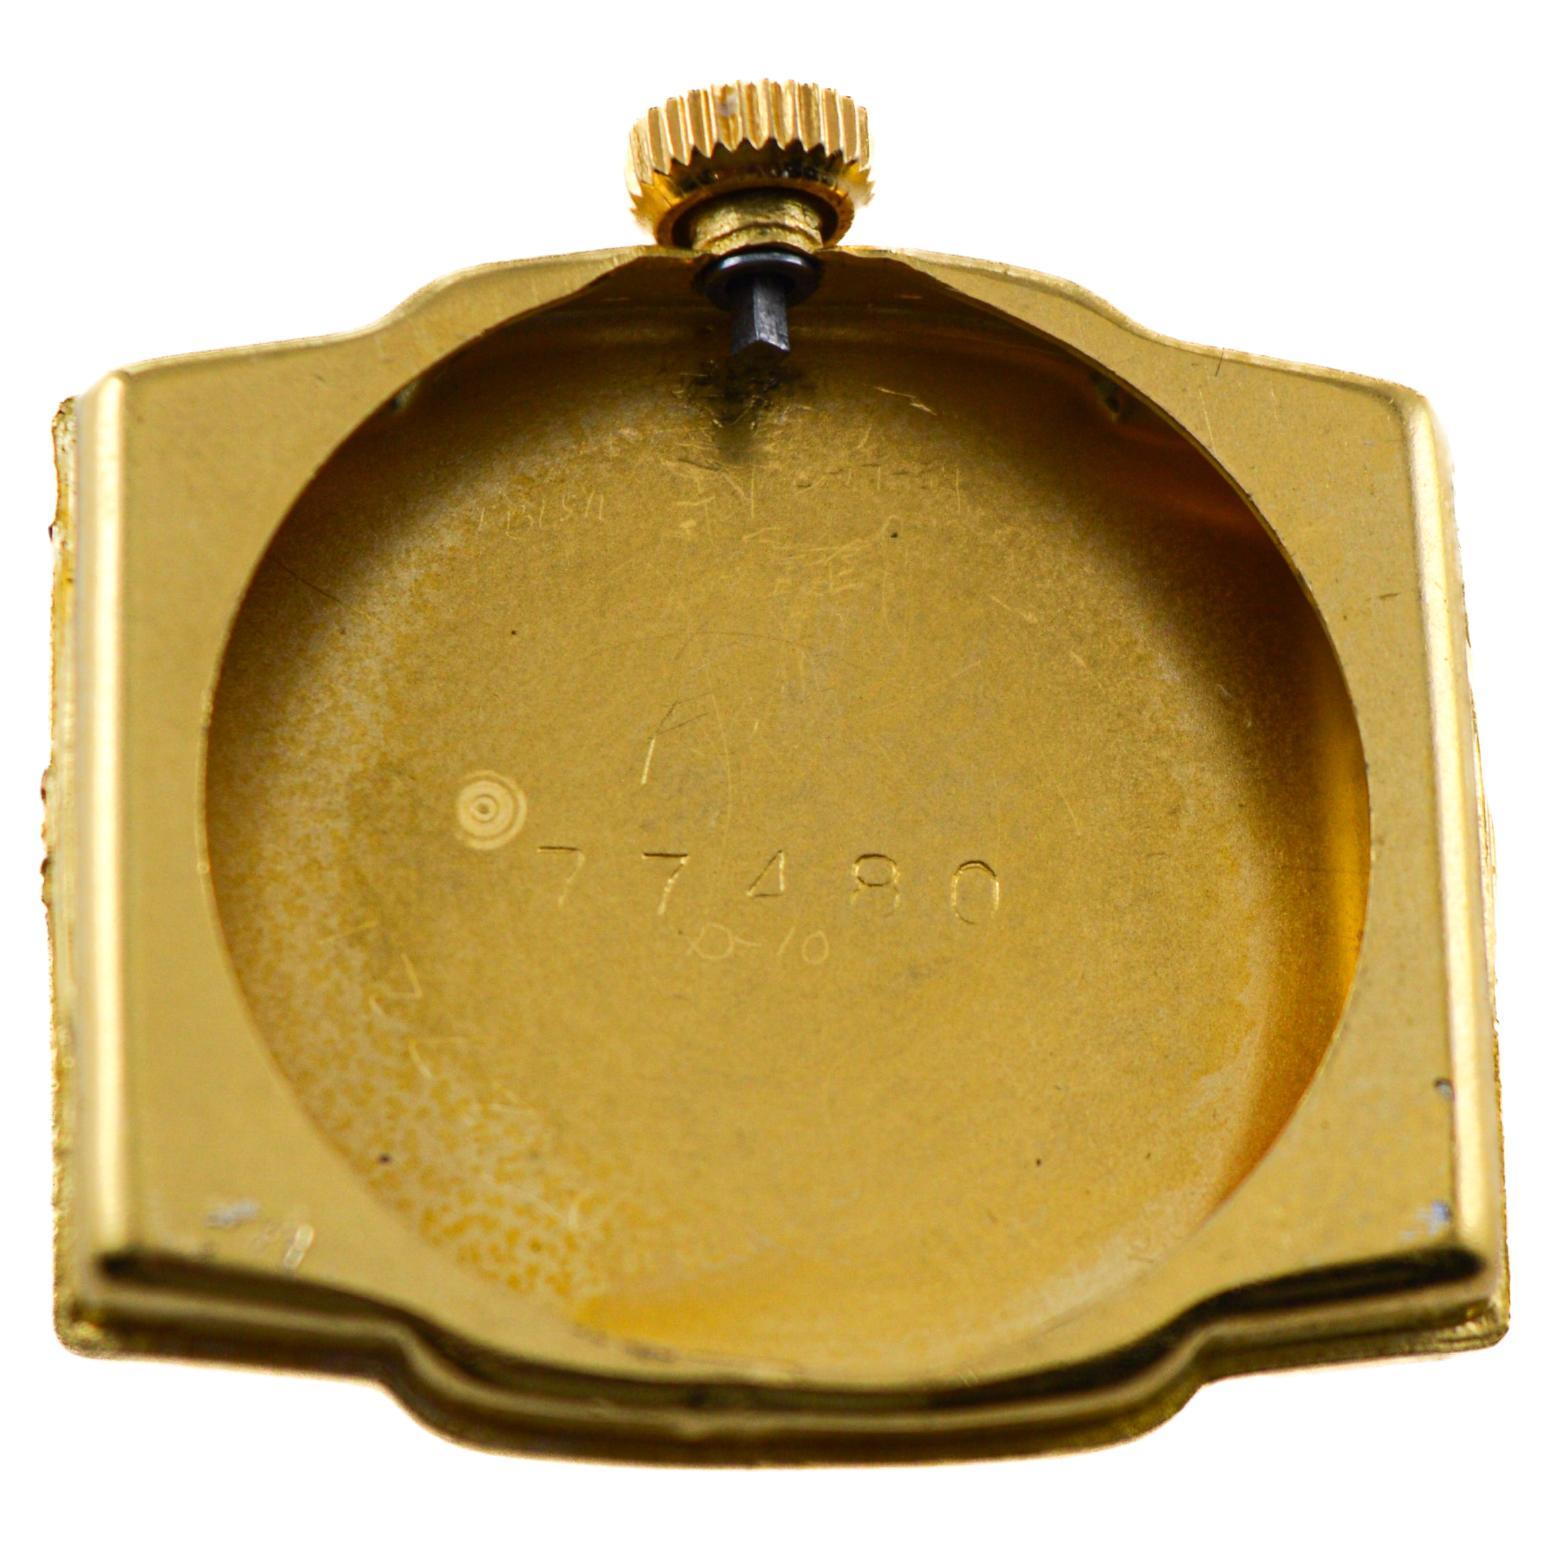 Waltham Yellow Gold Filled Art Deco Tonneau Shaped Watch Original Dial 1920's For Sale 8